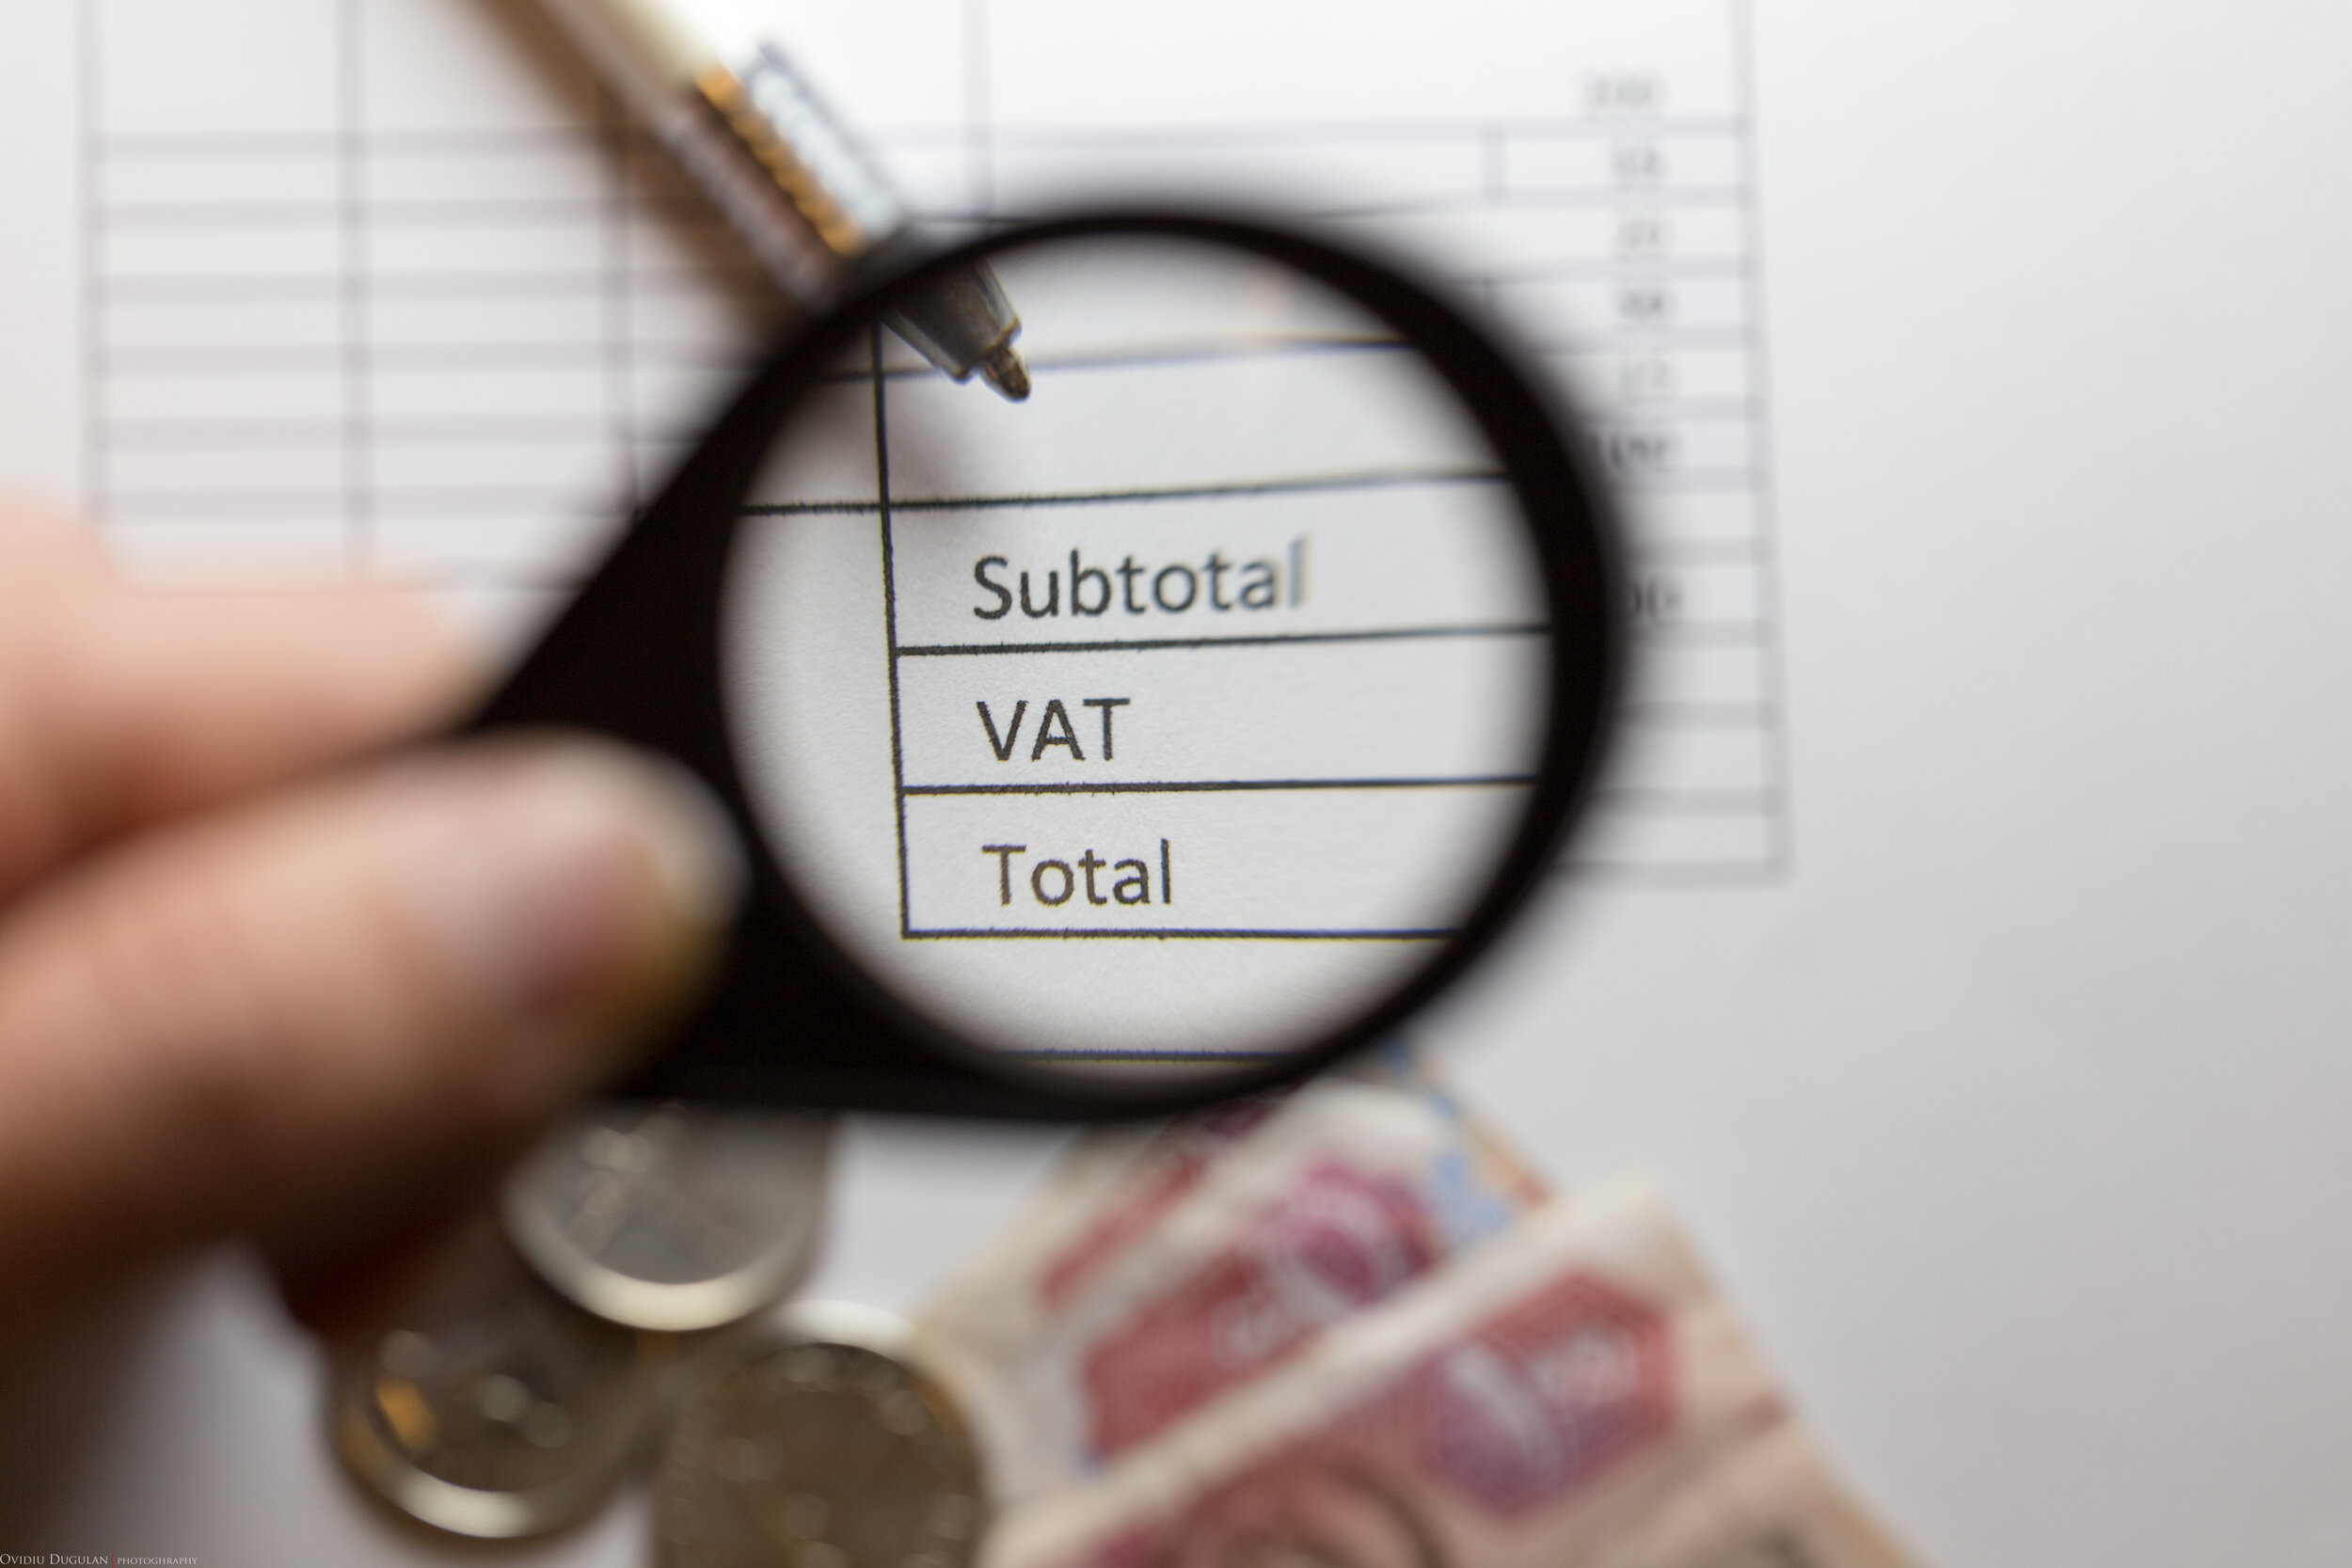 Value Added Tax is a consumption tax on goods or services, and it is critical that businesses understand the compliance details of what is required.